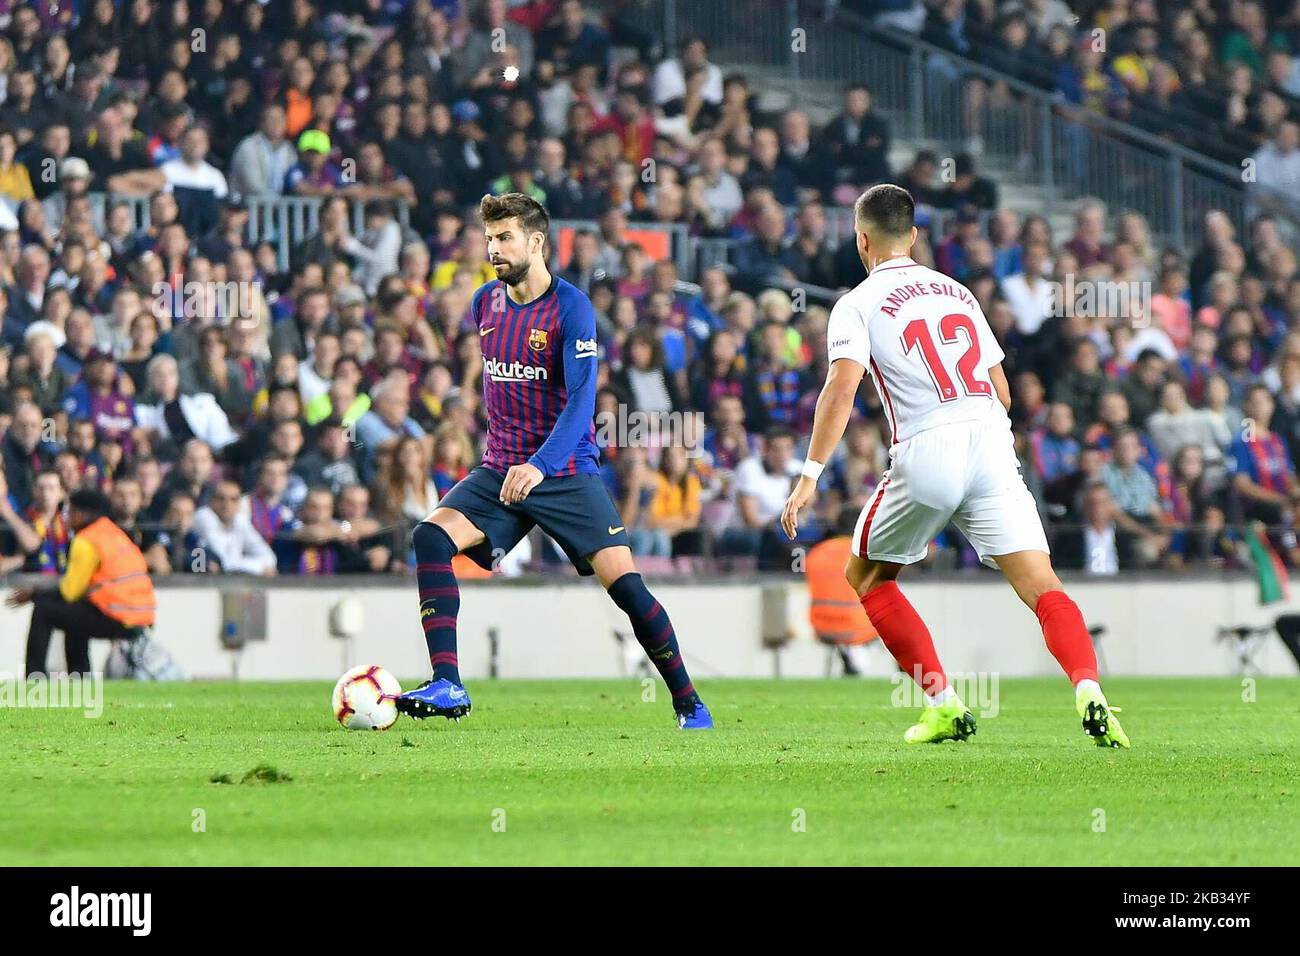 Gerard Pique of FC Barcelona in action during the spanish league, La Liga, football match between FC Barcelona and Sevilla FC on October 10, 2018 at Camp Nou stadium in Barcelona, Spain Credit: CORDON PRESS/Alamy Live News Stock Photo